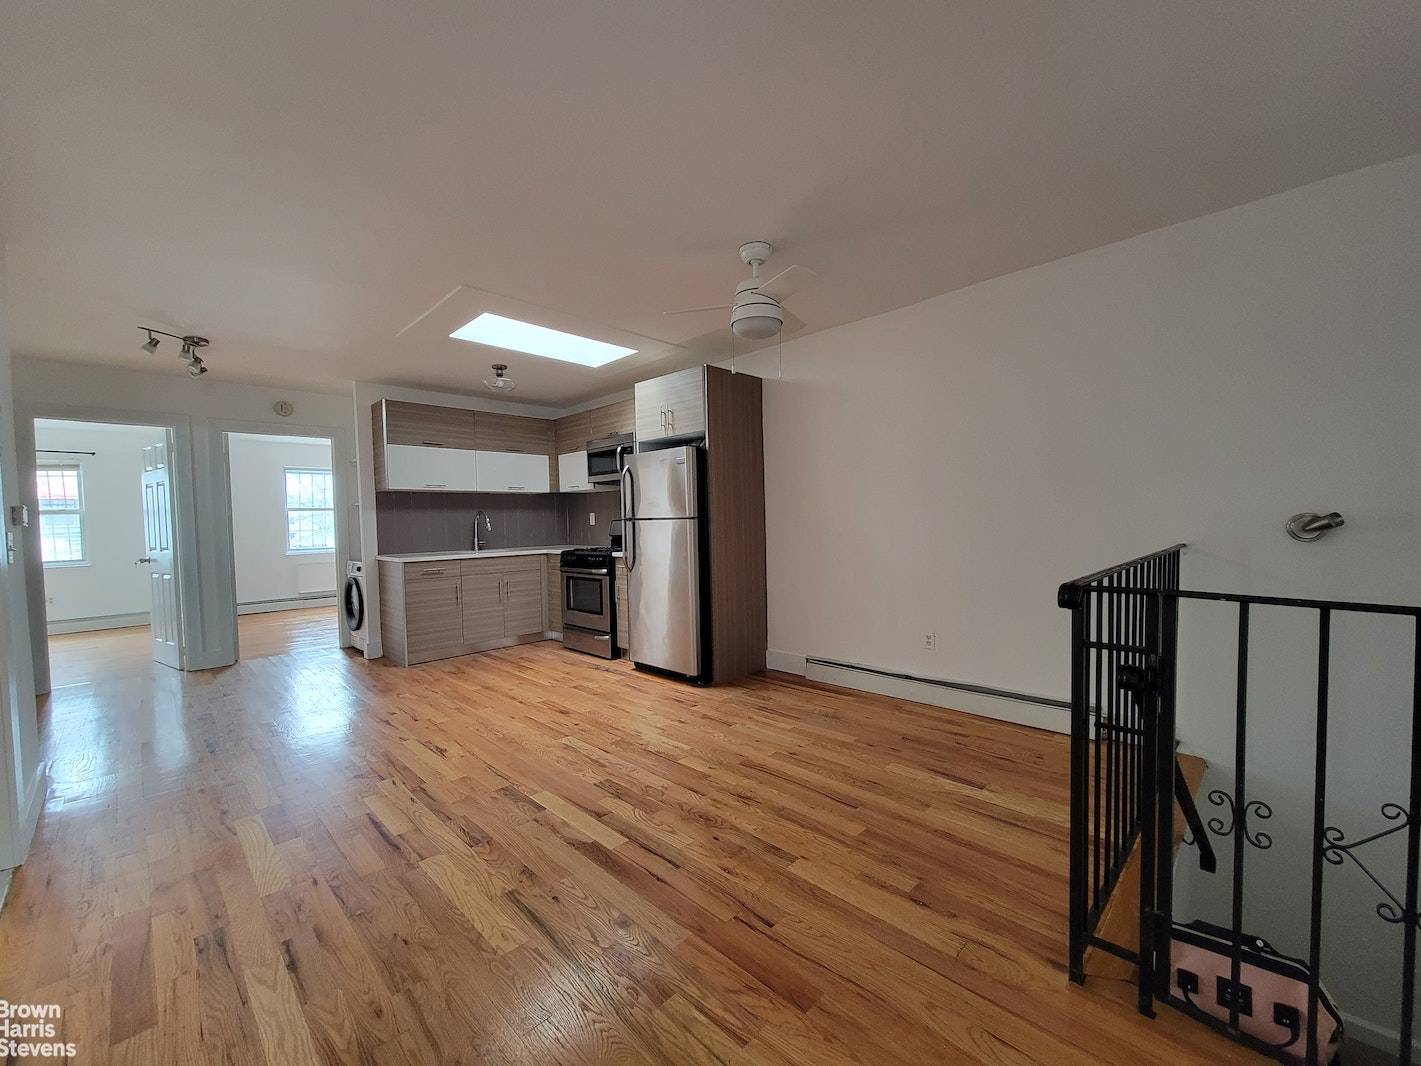 Very spacious 3 Bedroom 2 Bathroom apartment with in unit laundry available in Bushwick.